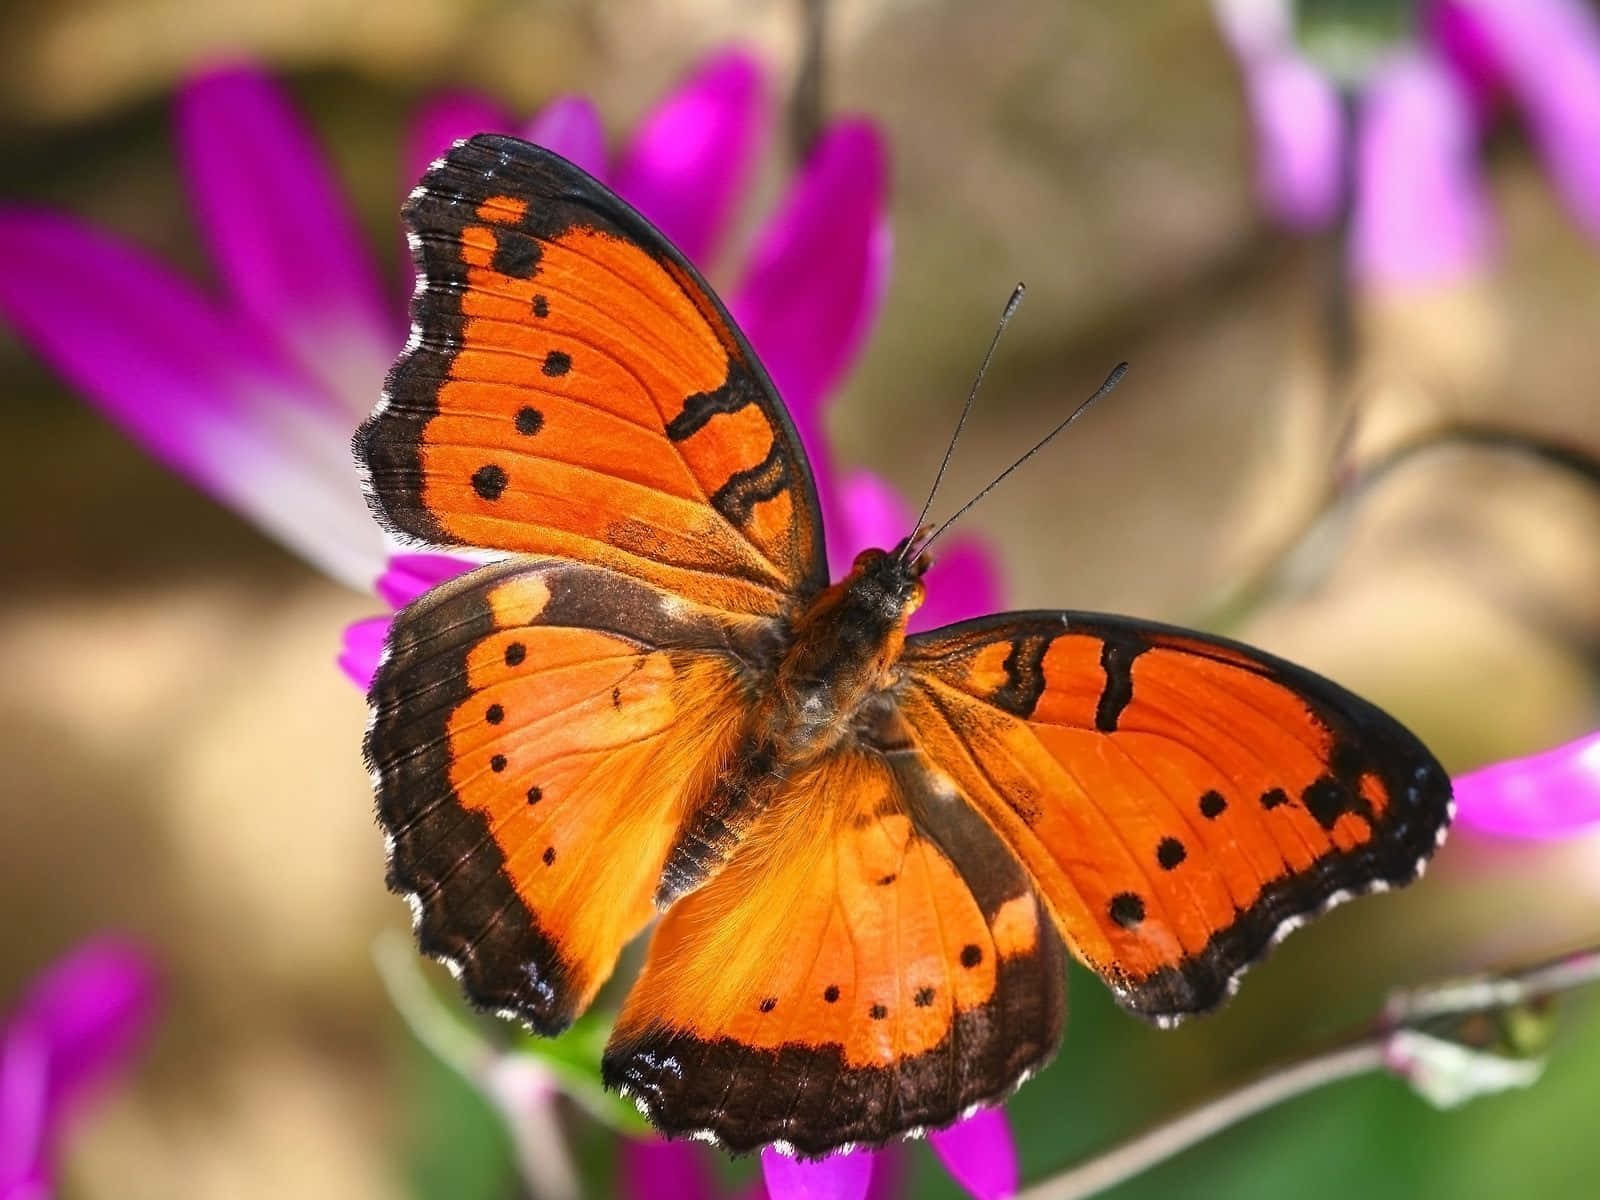 Colorful butterfly resting on a flower in the sun